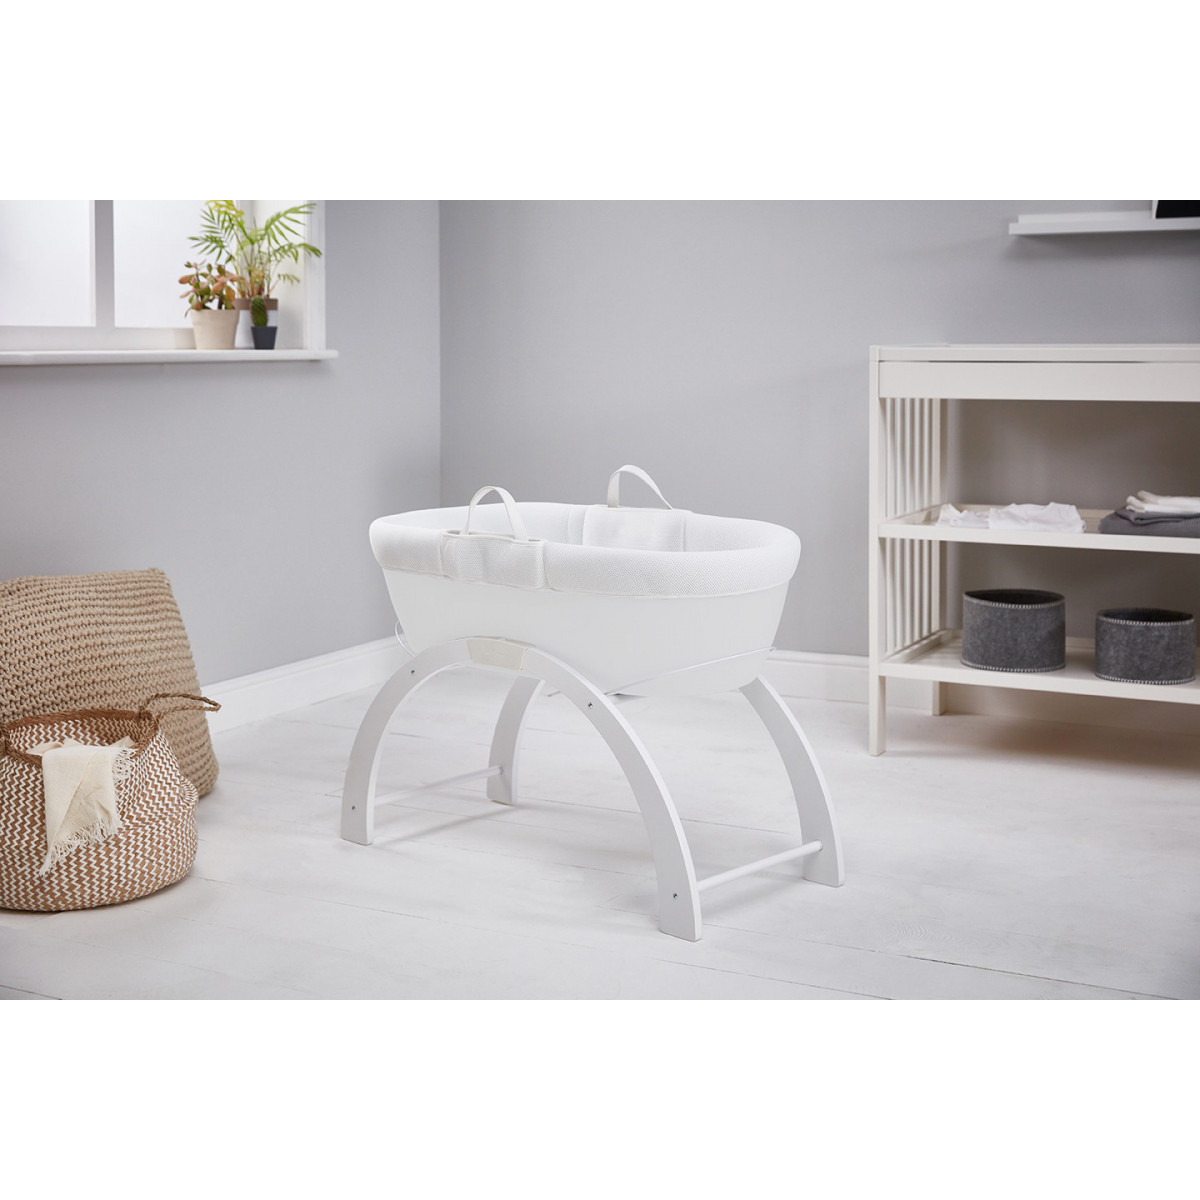 Difference Between Bassinet and Moses Basket  Compare the Difference  Between Similar Terms